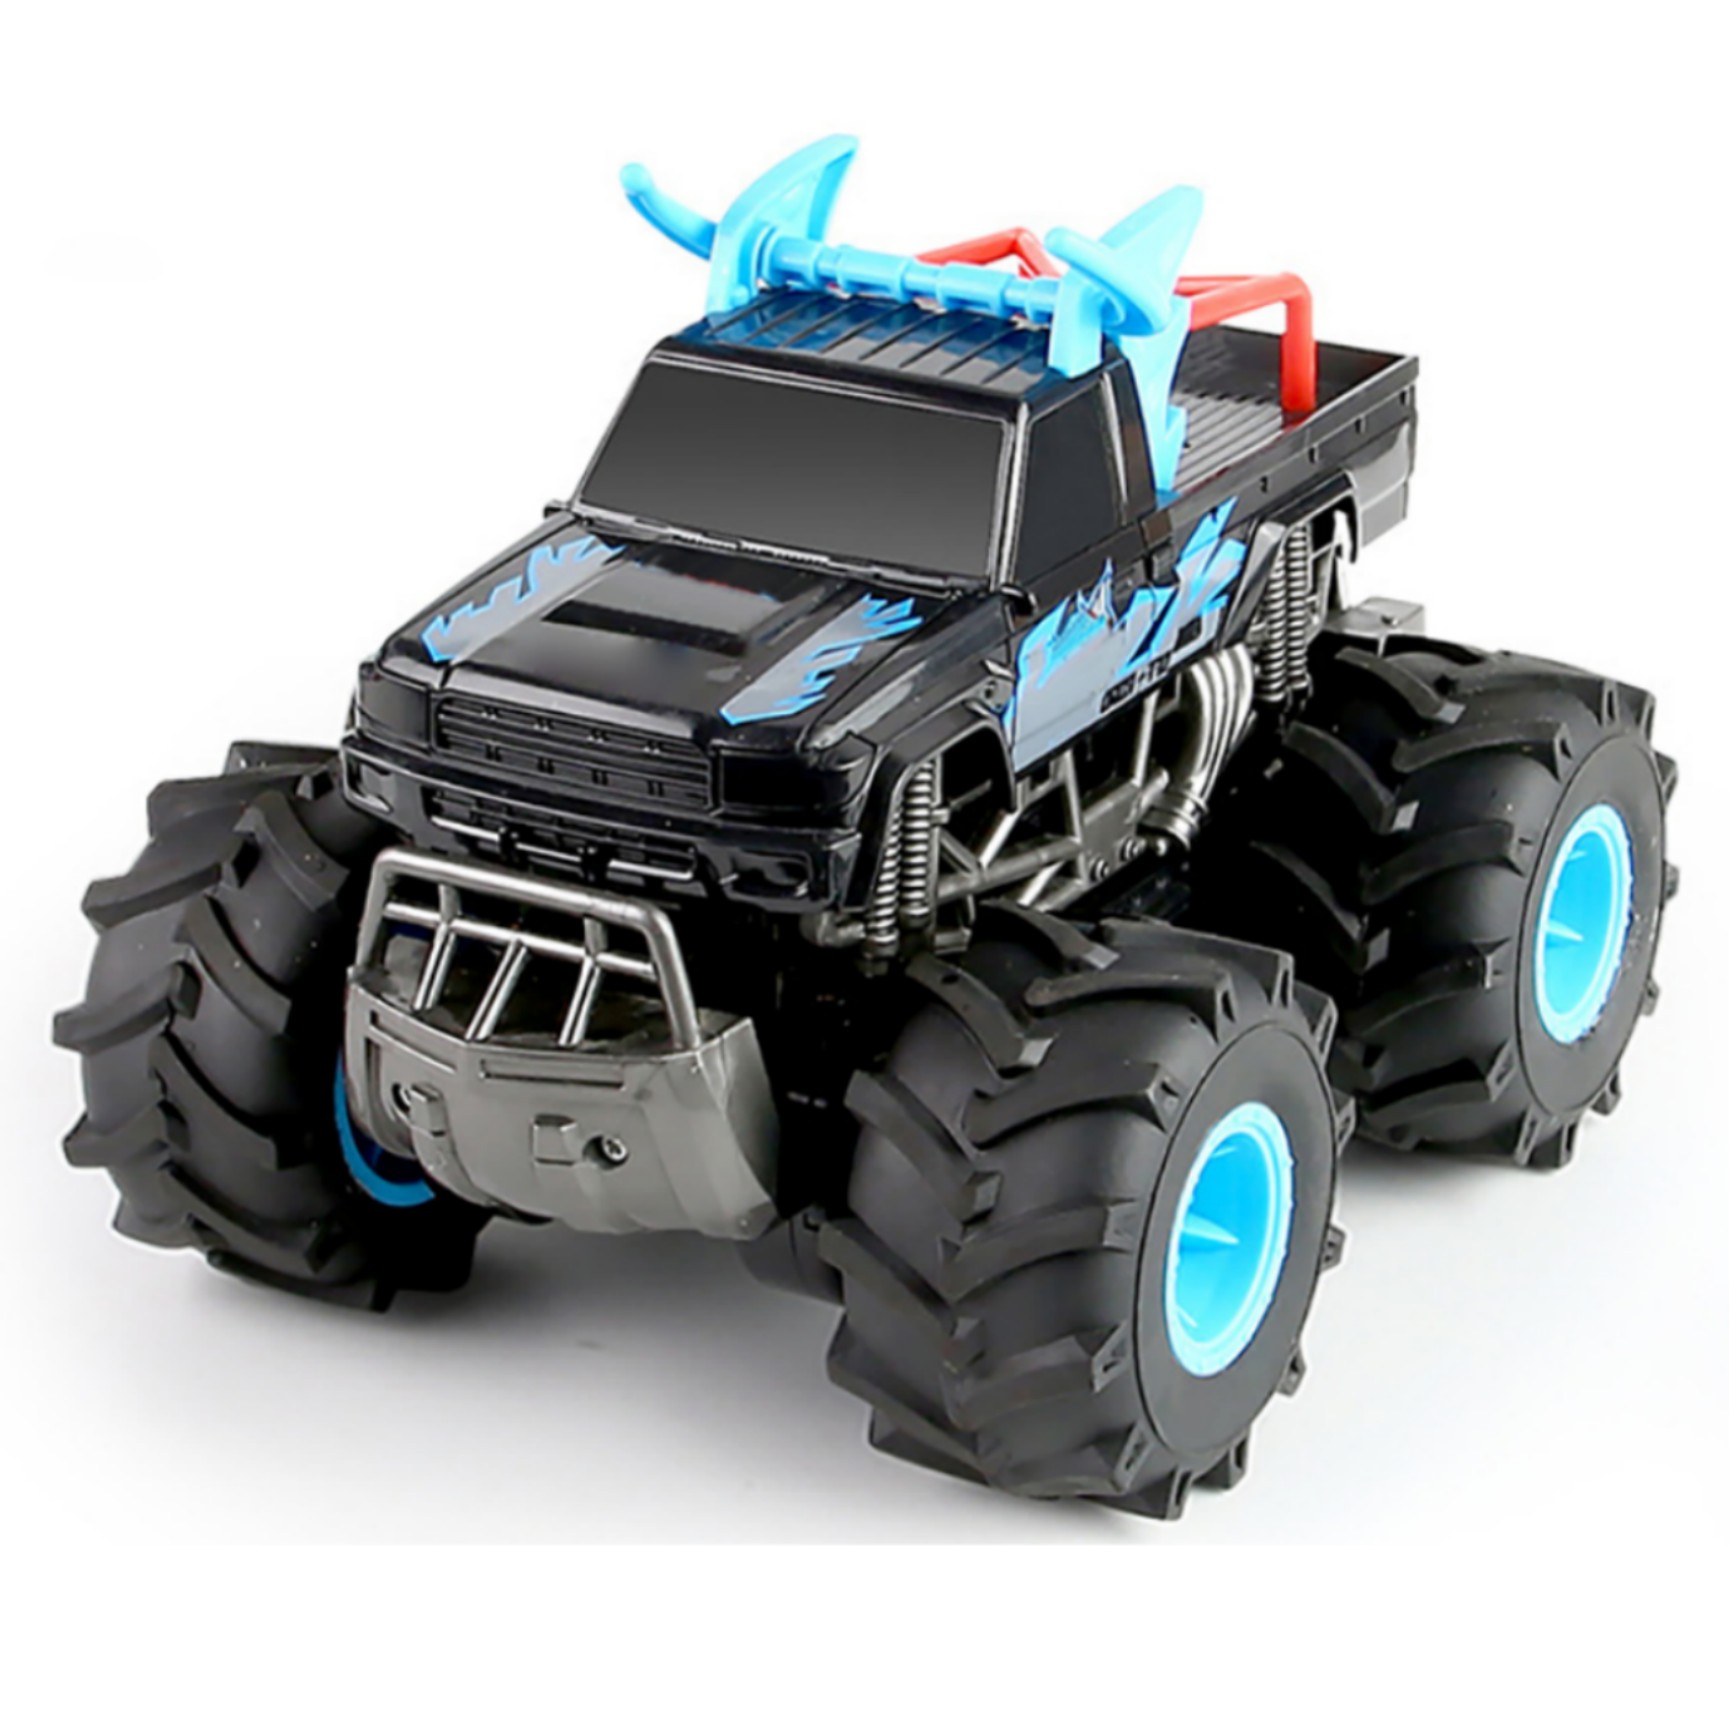 2.4g Remote Control Amphibious Climbing Car 4wd Long Battery Life Double-Sided Stunt Vehicle